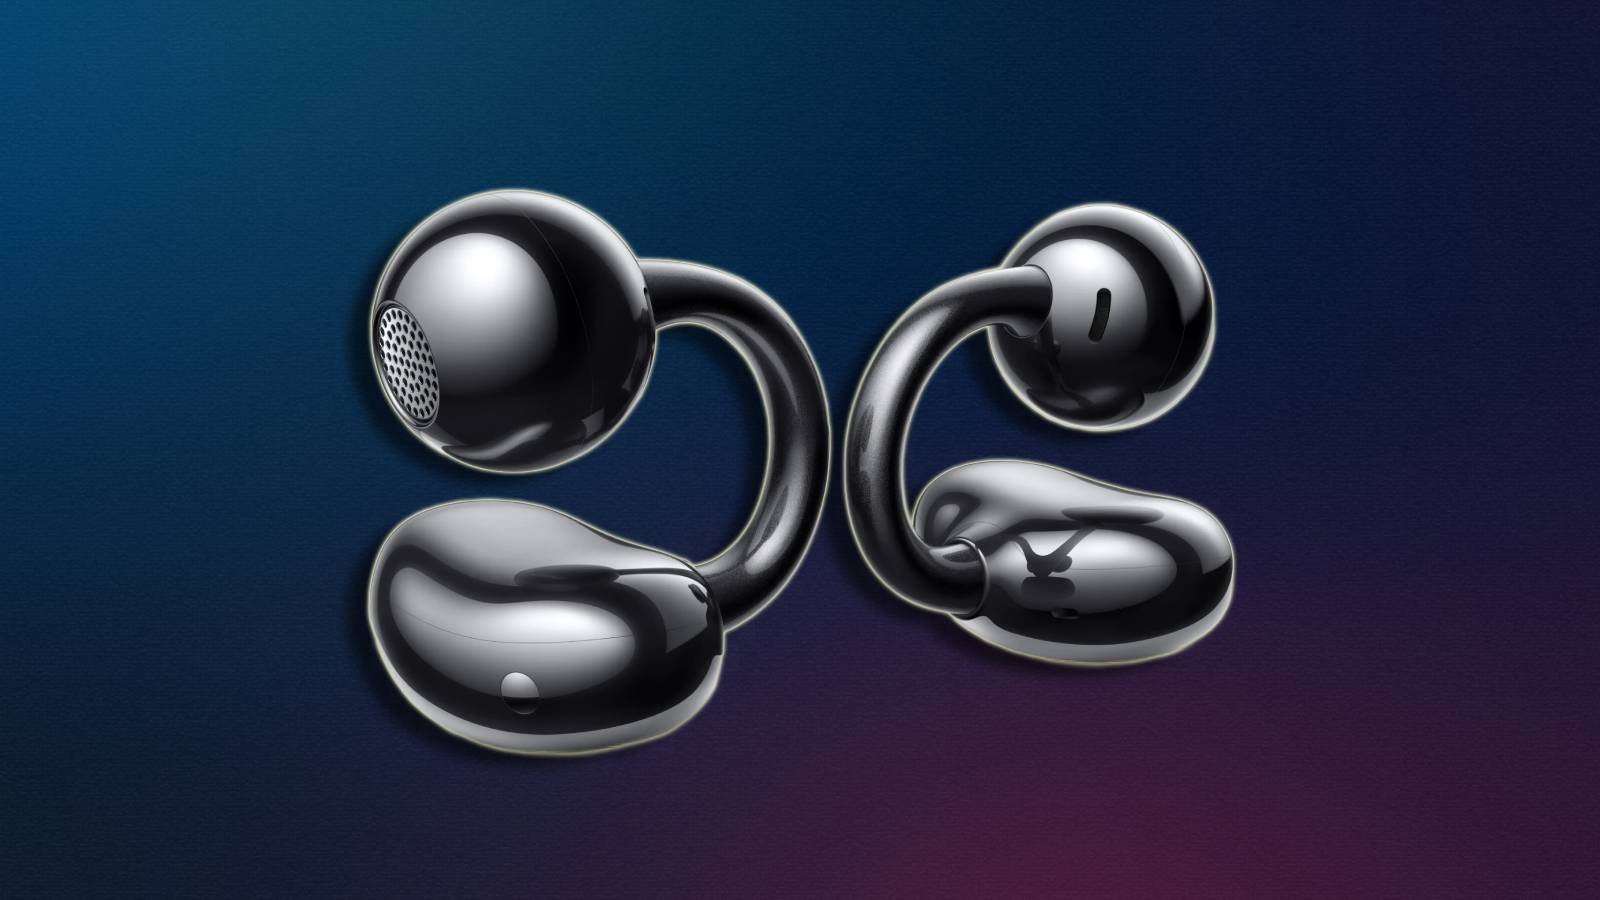 New Huawei earbuds don't go into your ear & look super strange - Dexerto